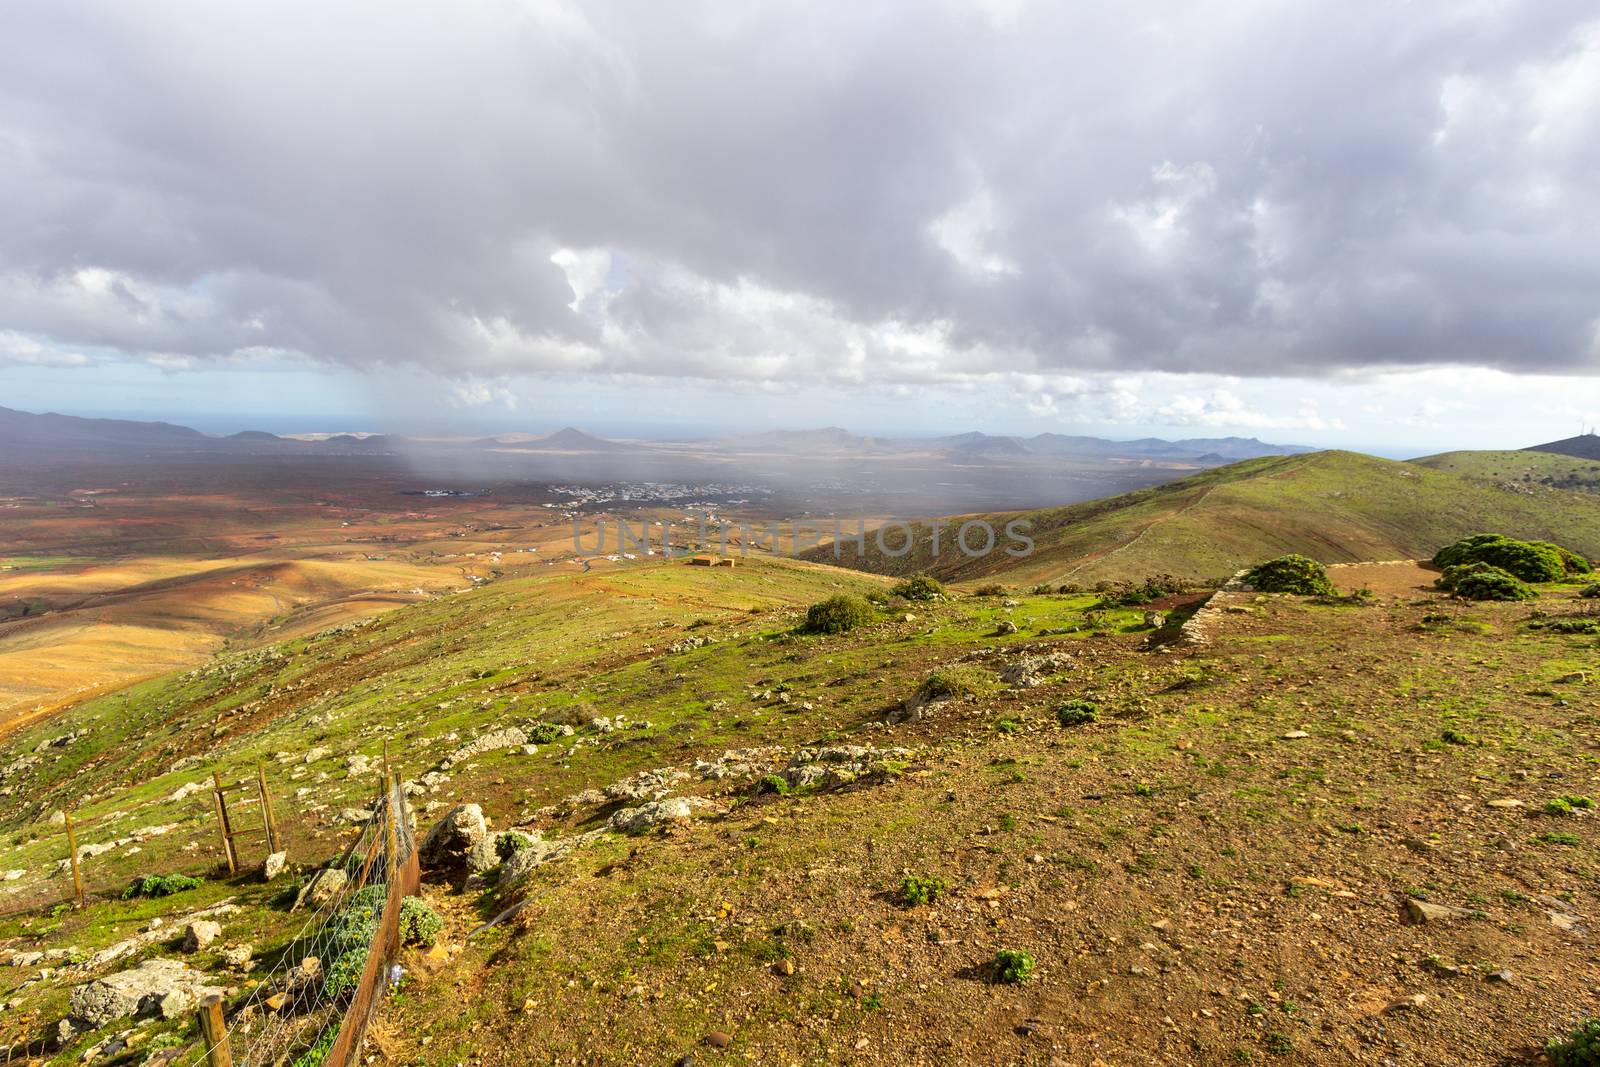 Panoramic view at landscape from viewpoint Mirador Morro Velosa on Fuerteventura, Spain with  green vegetation and multi colored volcanic hills